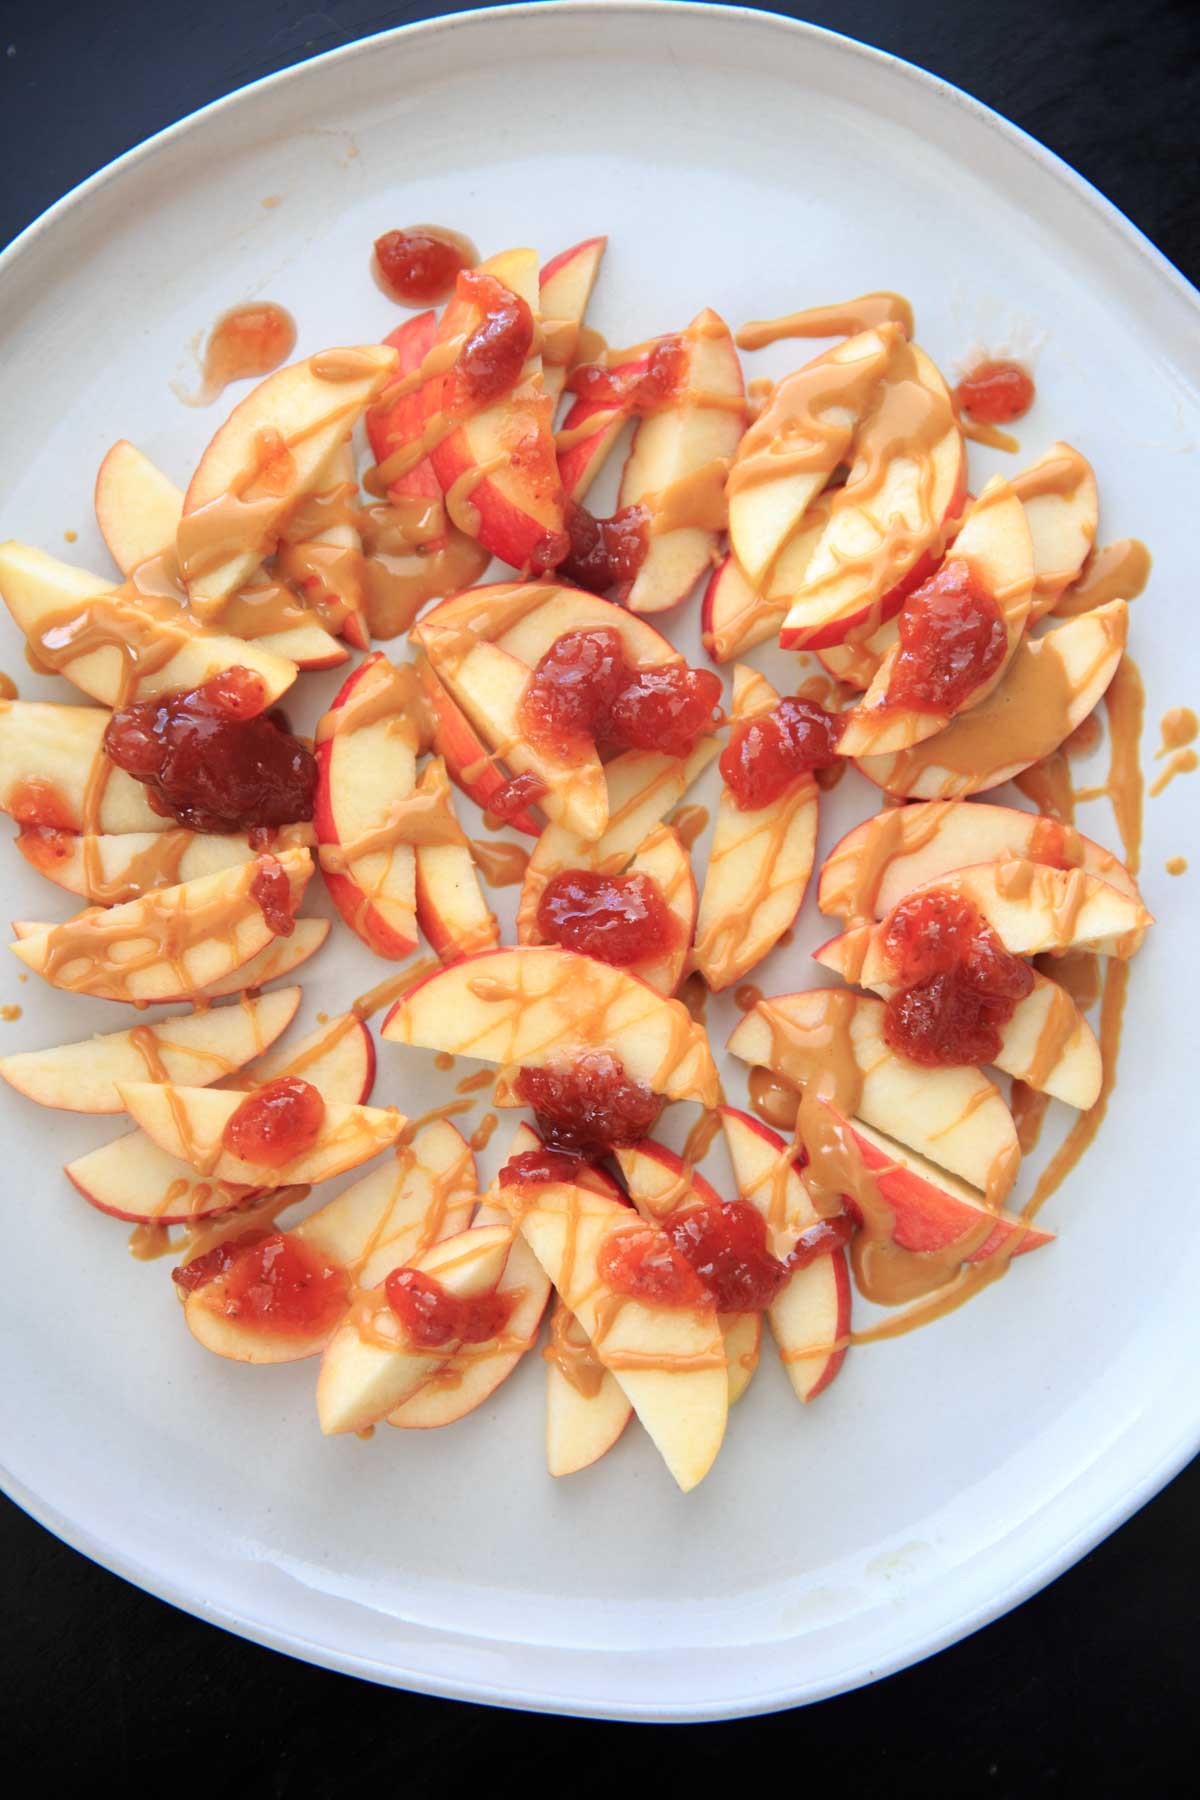 This peanut butter jelly combo on apple nachos is the perfect quick and healthy snack for kids and adults alike! Vegan, gluten-free, protein-packed and delicious.